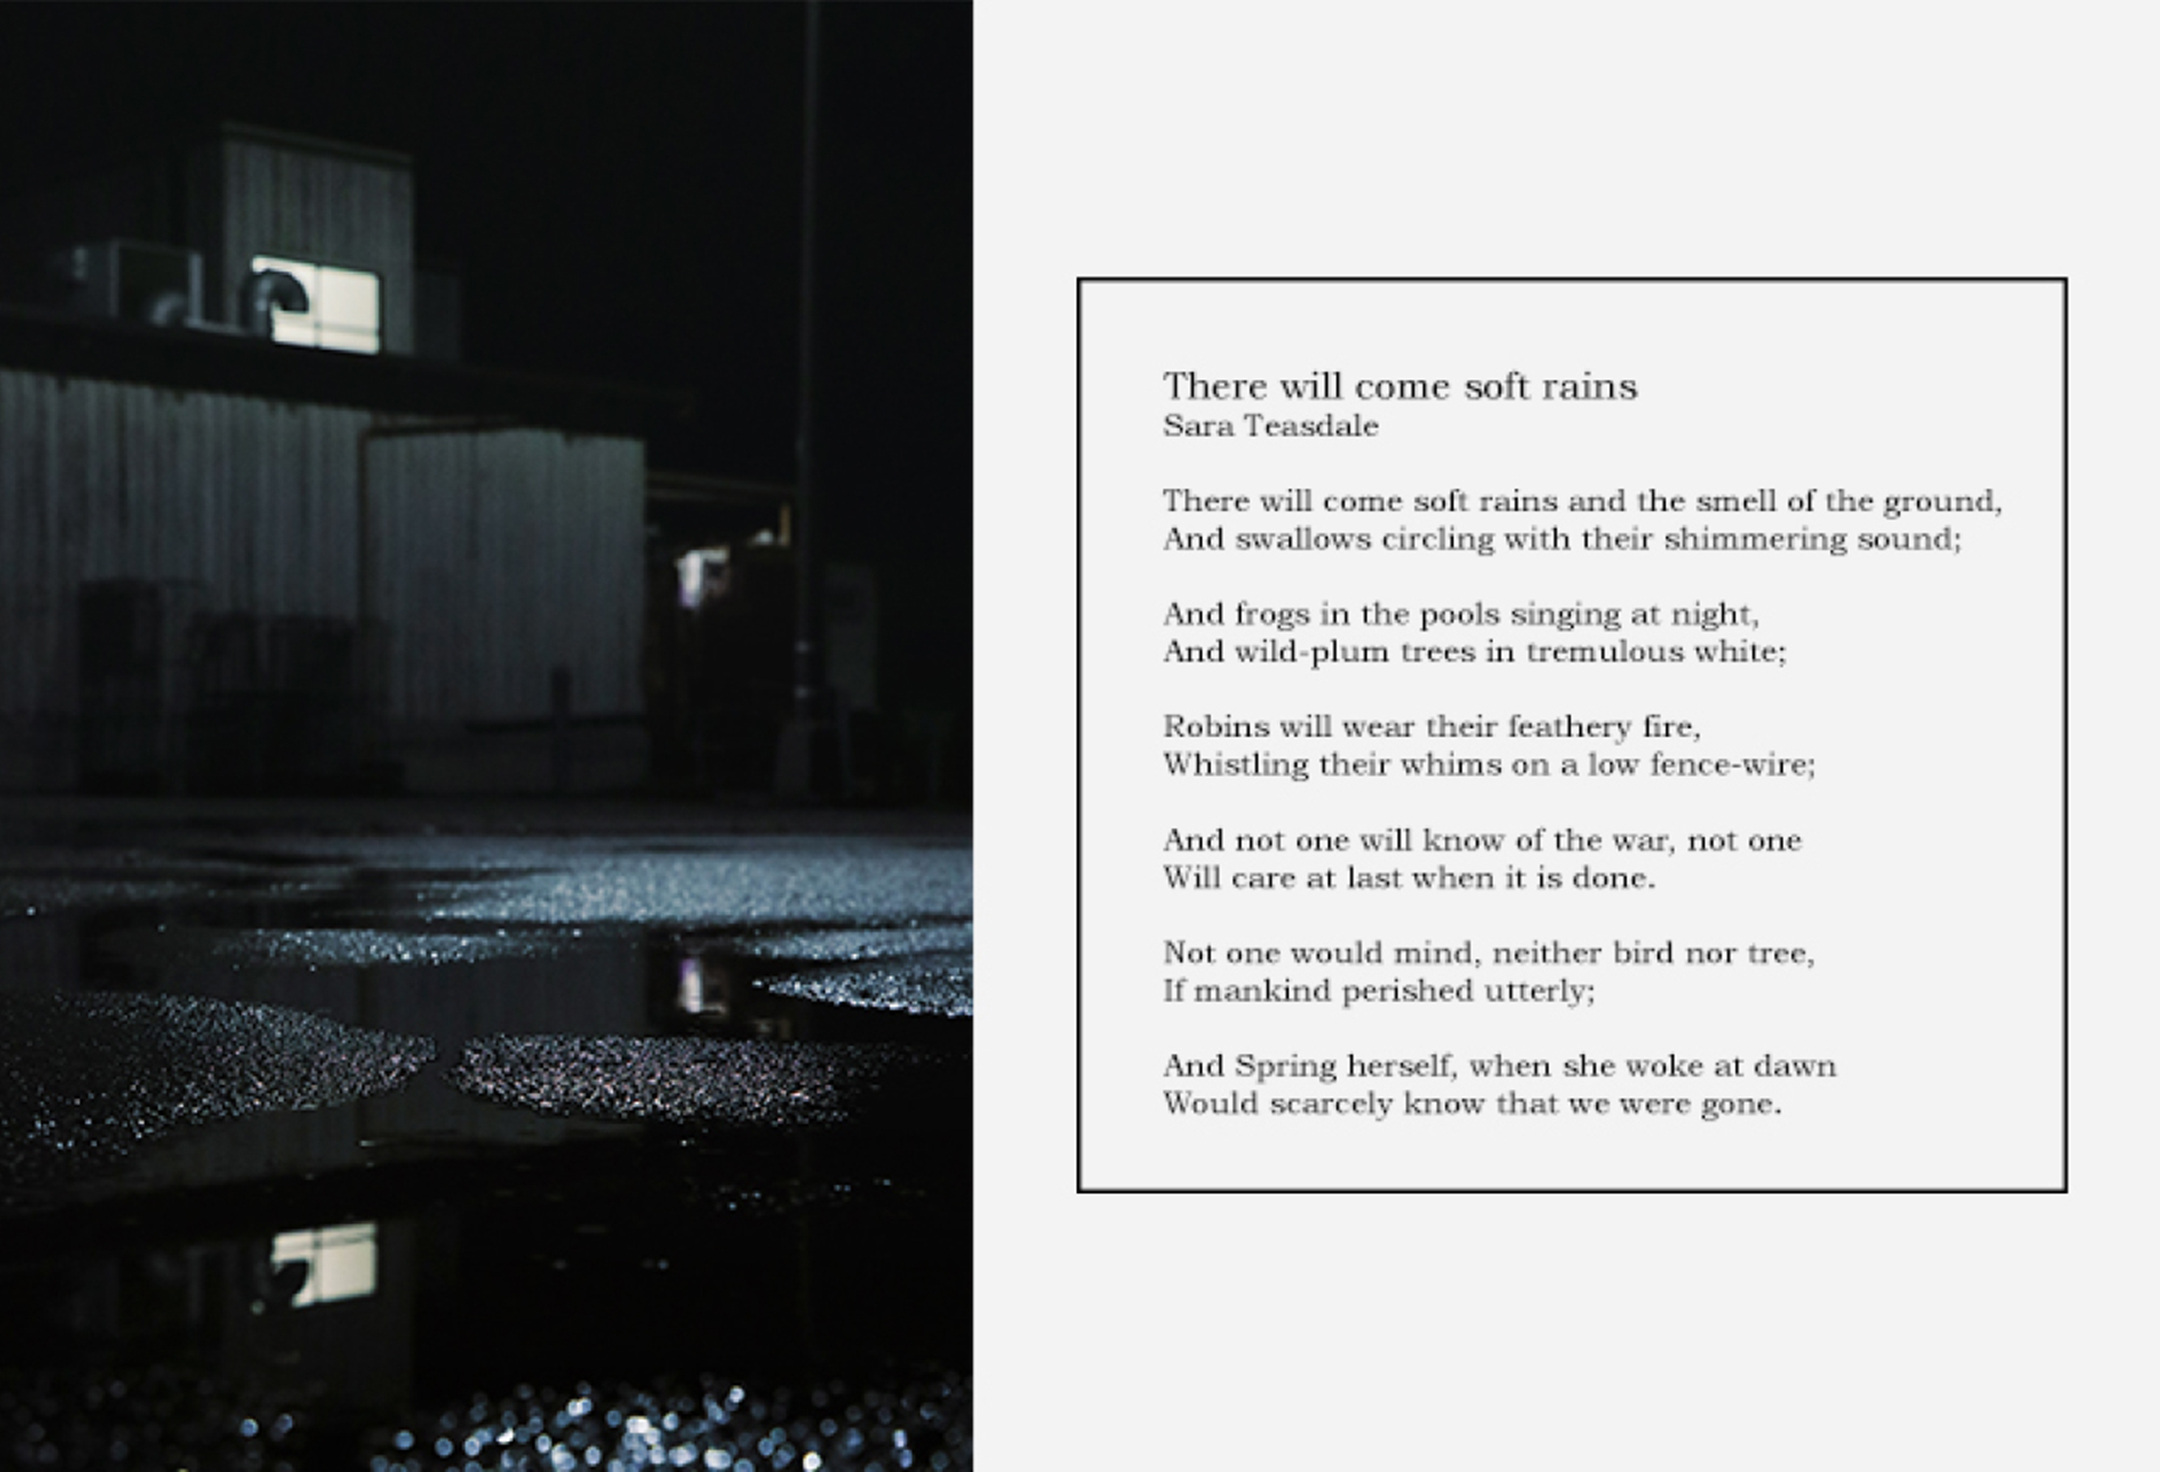 Photograph of a dark, wet street, placed to the left of a written poem